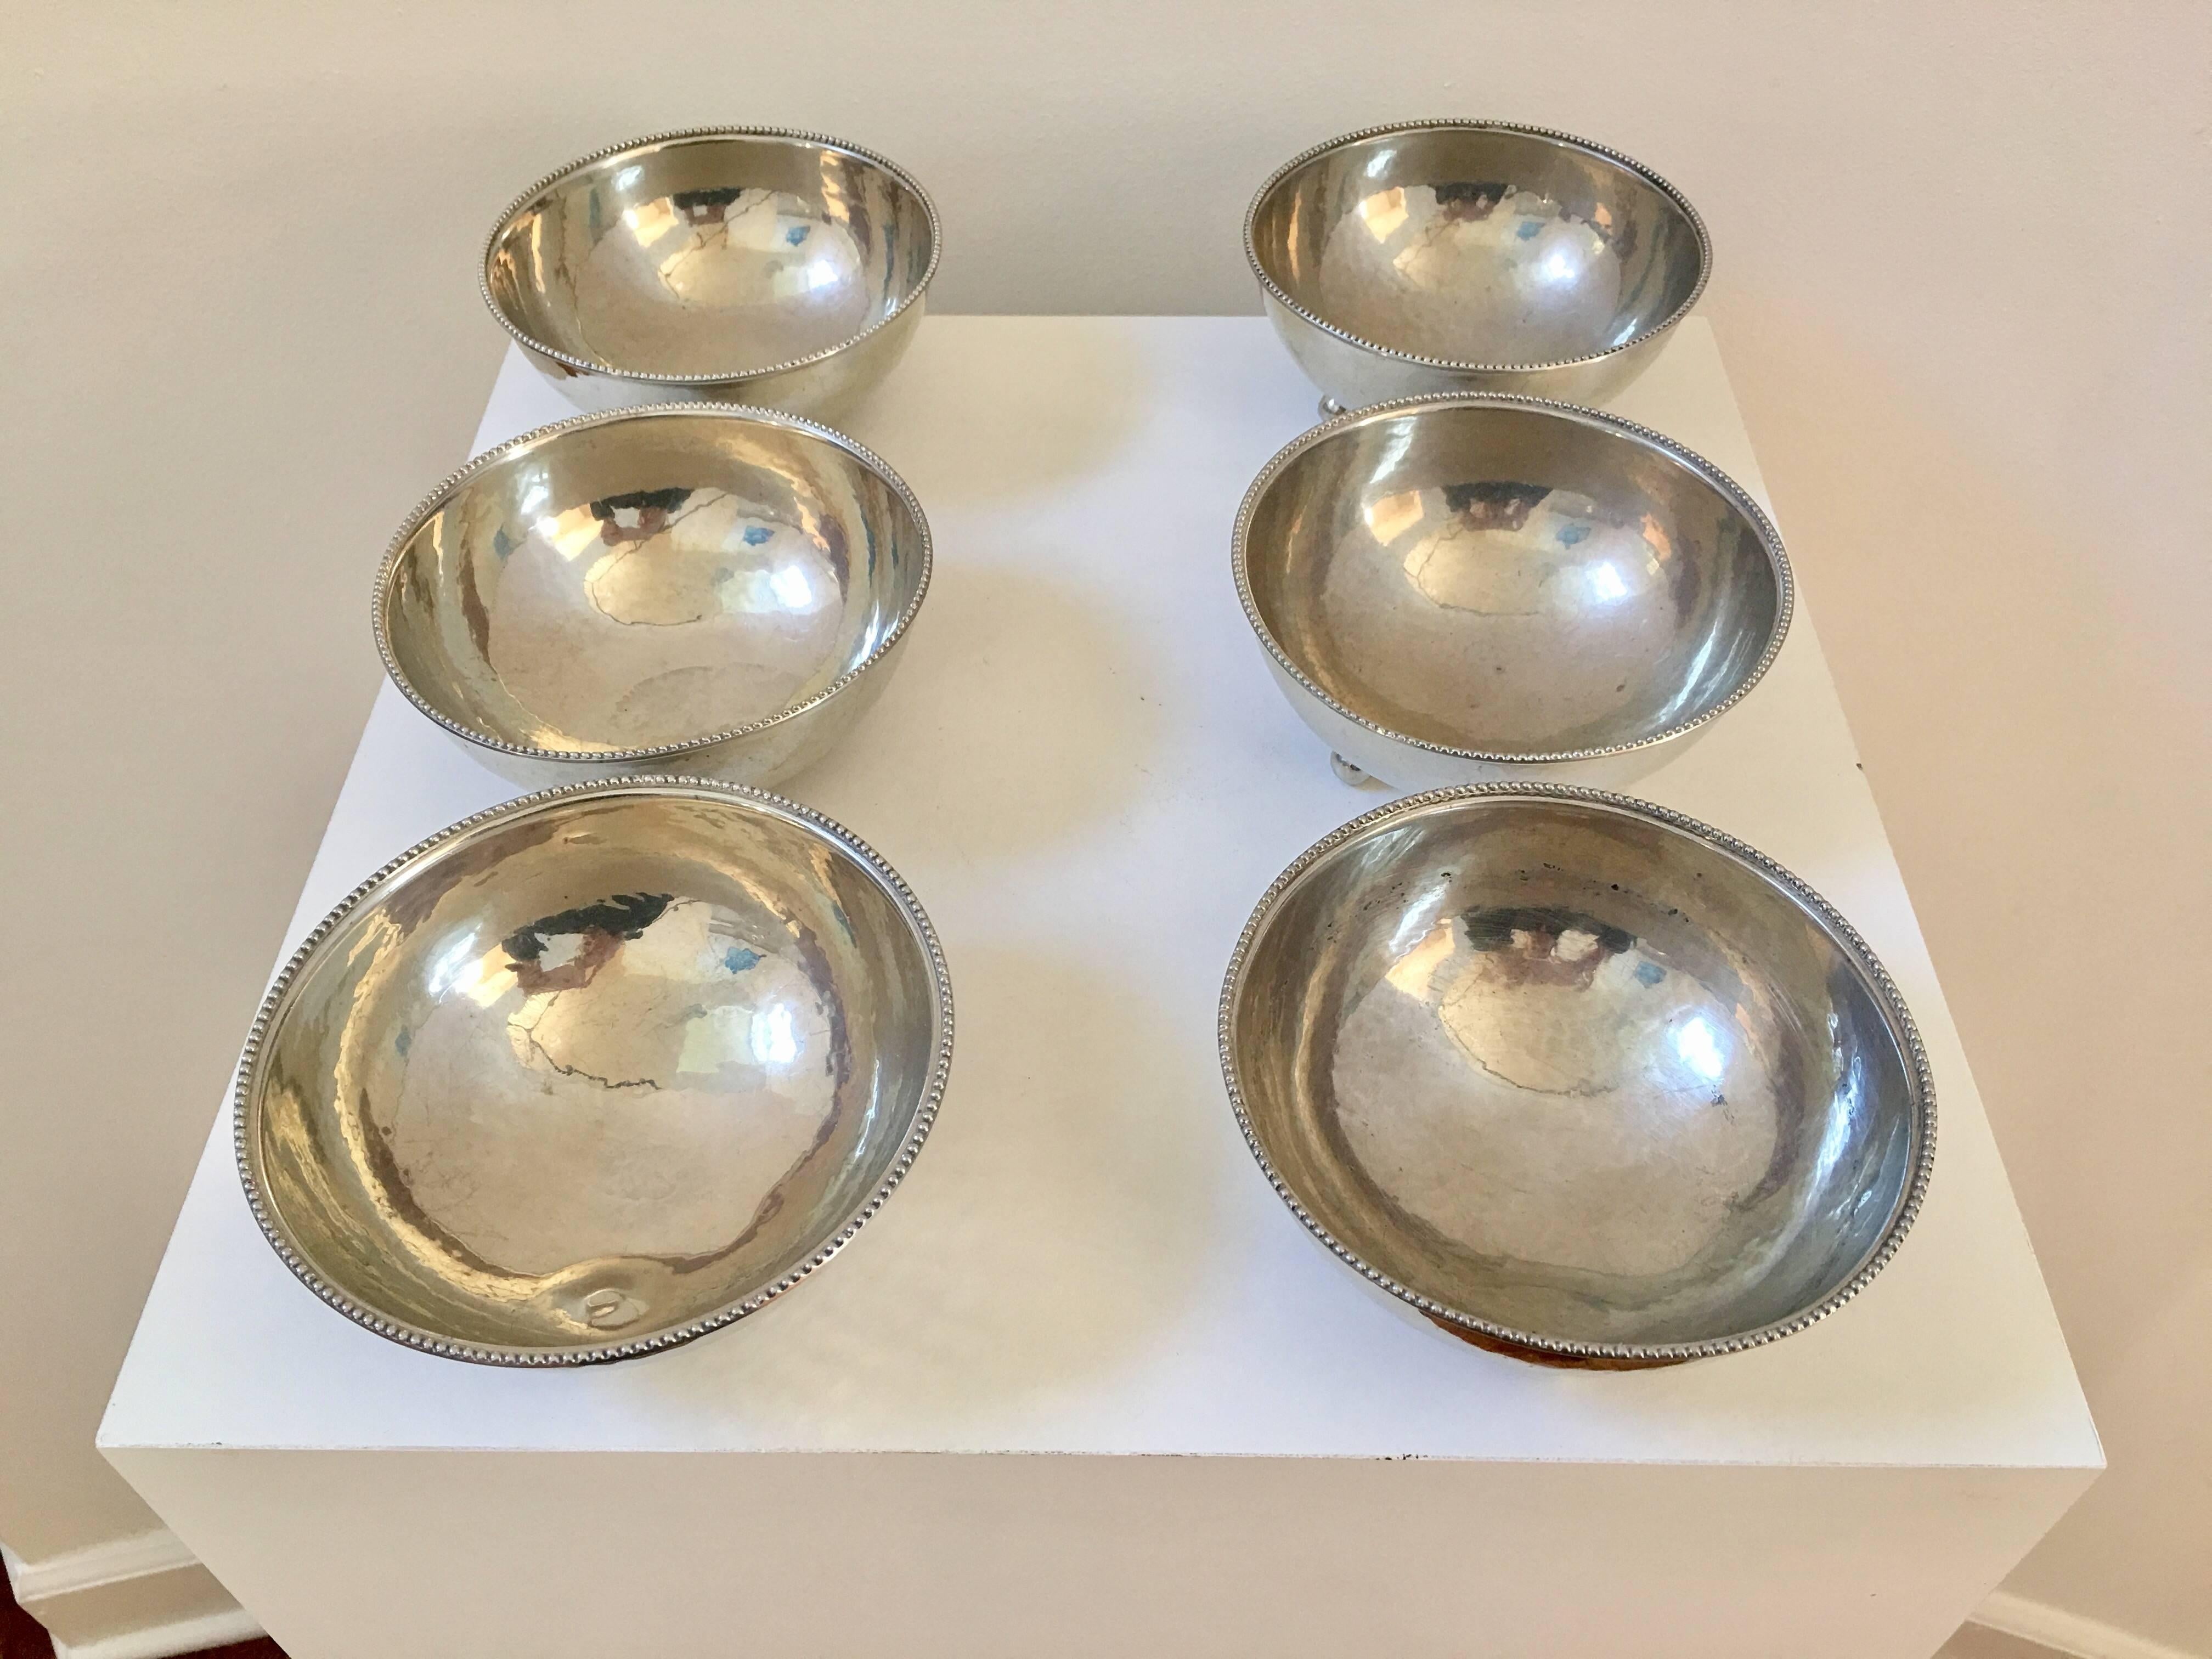 A fabulously detailed set of six pewter bowls with an almost silver finish. Each bowl size and curvature fits the palm of your hand beautifully while the three ball feet in each bowl rests easy on a table. The beading detail on the rim of each bowl